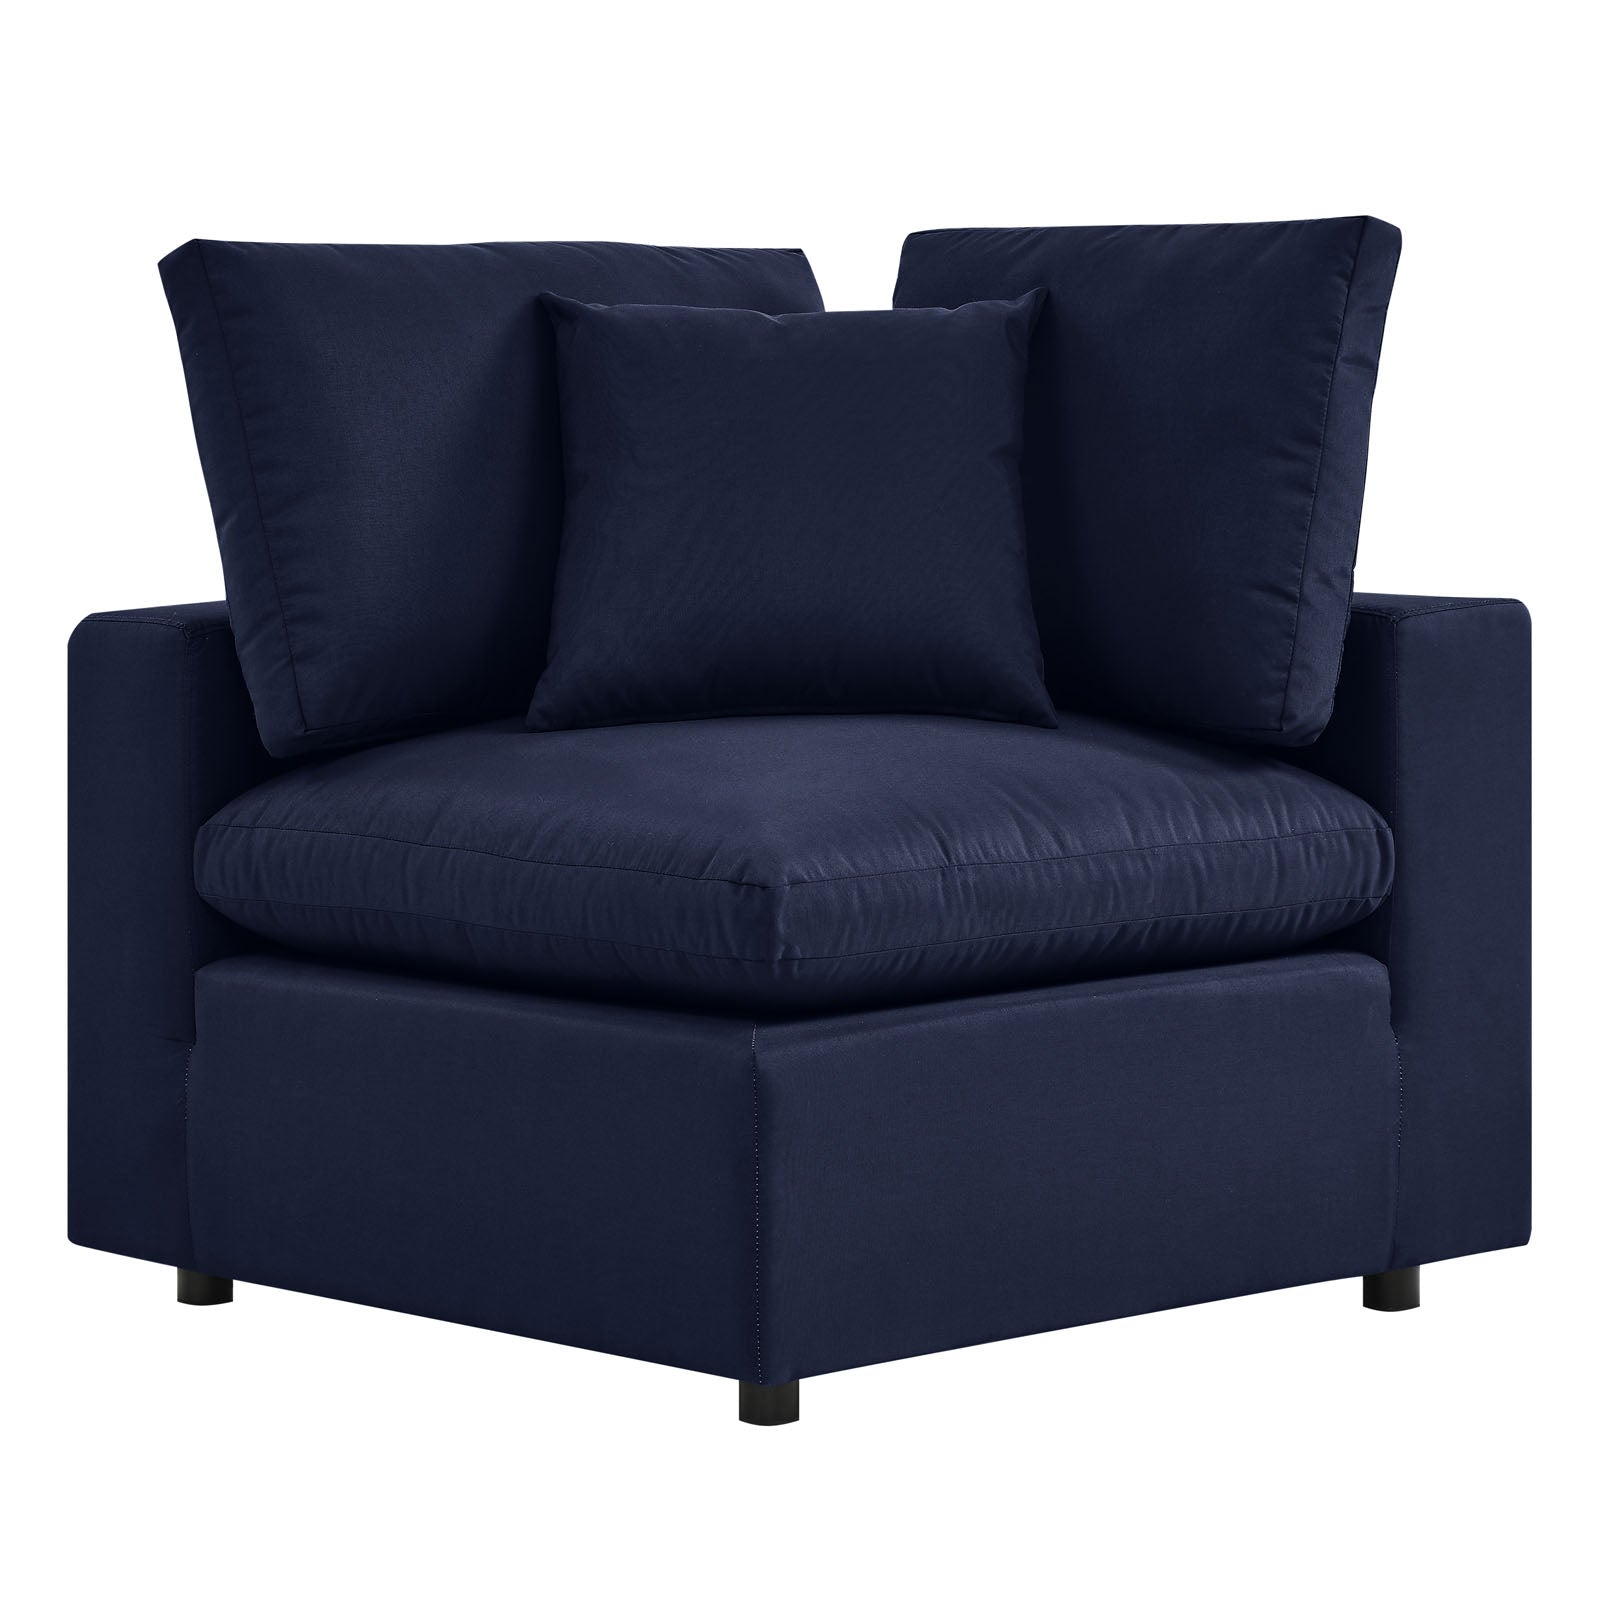 Modway Outdoor Sofas - Commix 6-Piece Outdoor Patio Sectional Sofa Navy